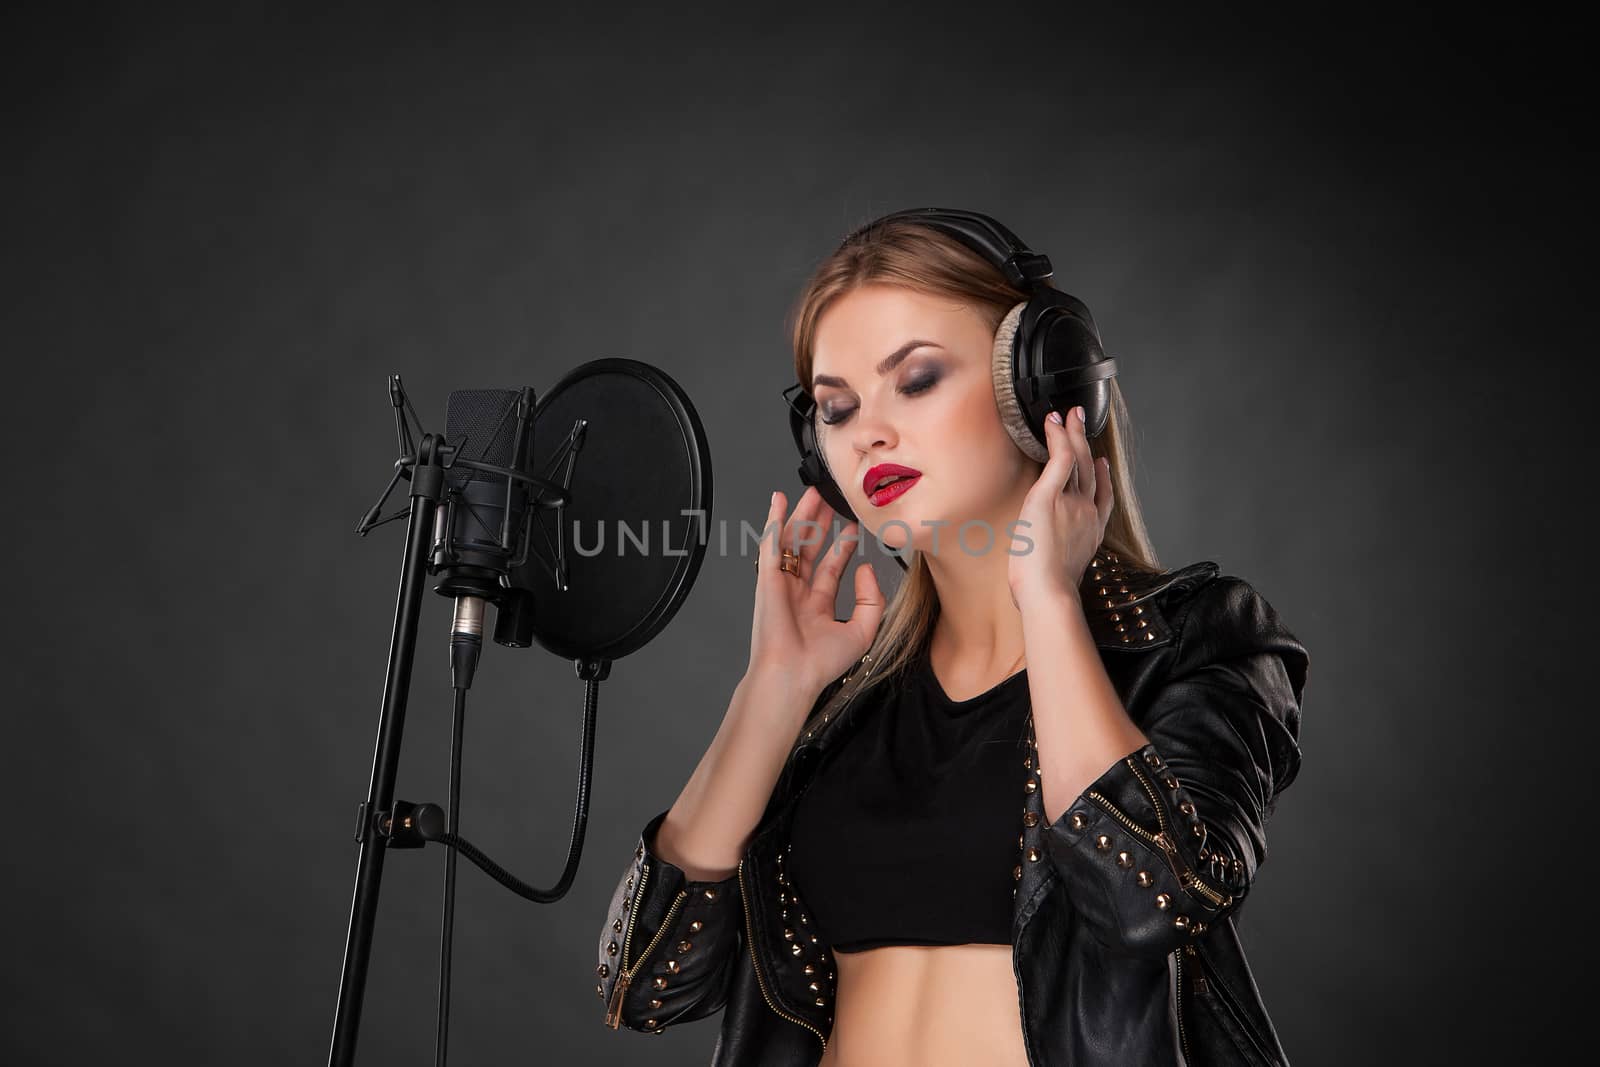 Portrait of a beautiful woman singing into microphone with headphones in studio on black background by master1305